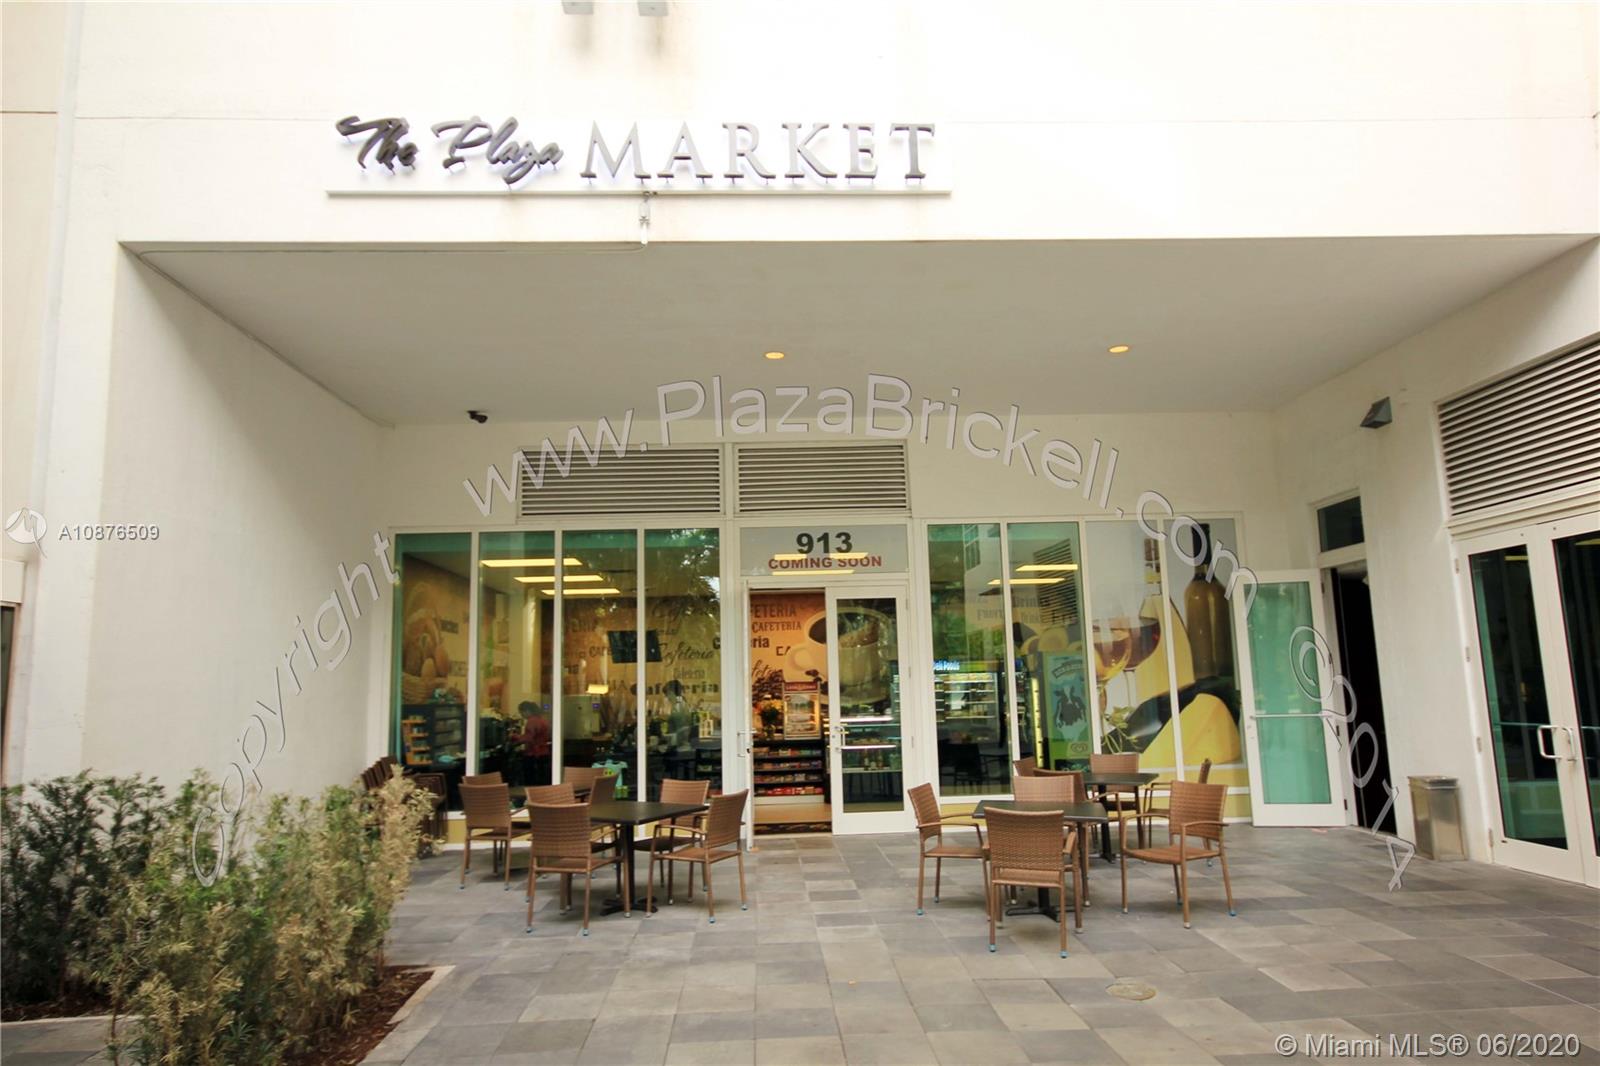 The Plaza on Brickell South image #68